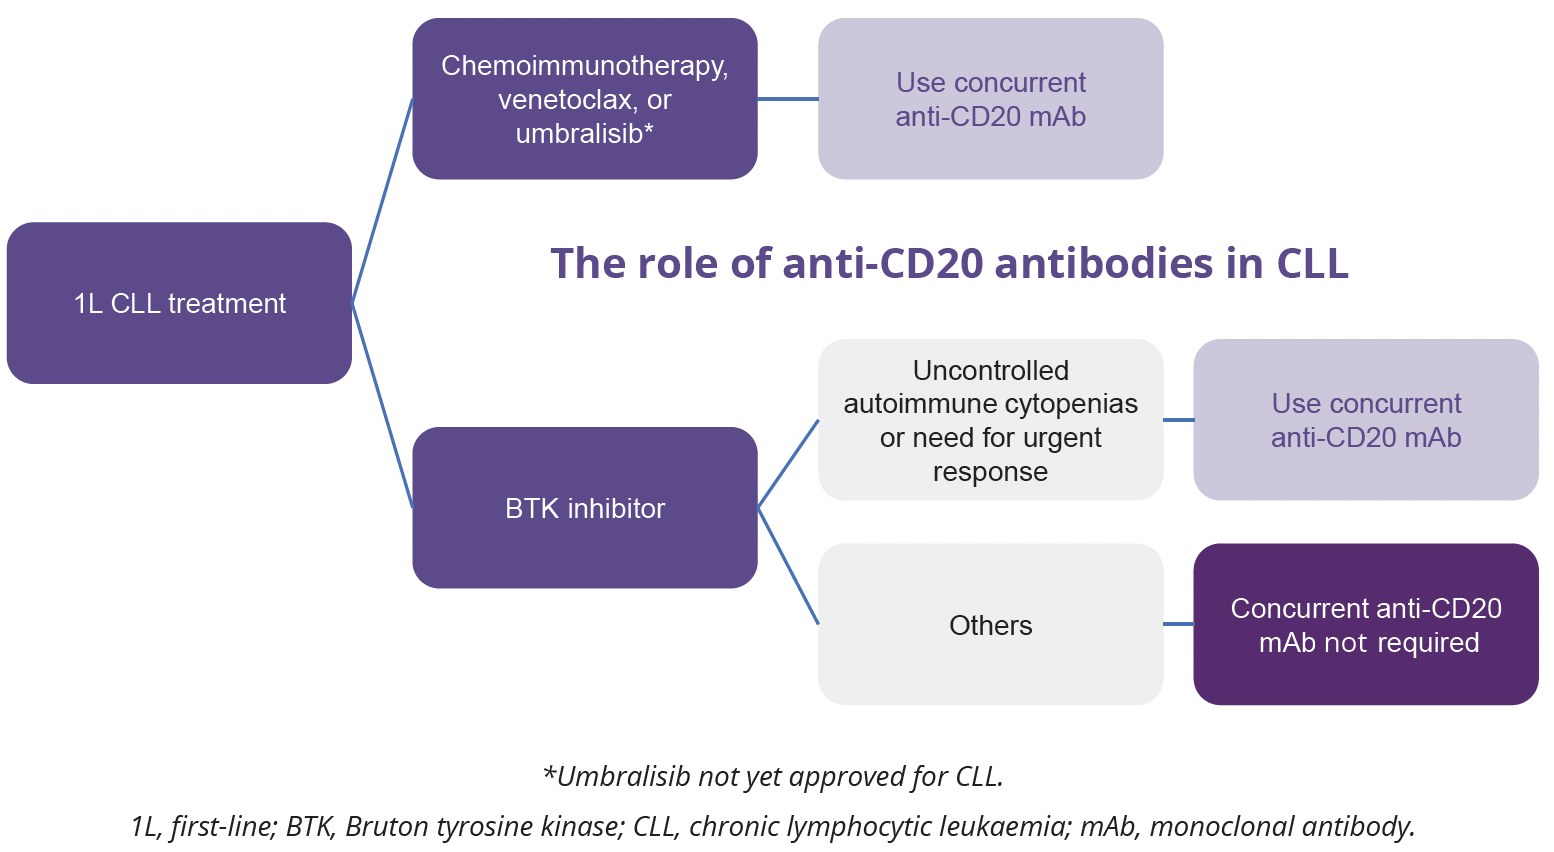 Role of anti-CD20 antibodies for 1st line treatment of CLL